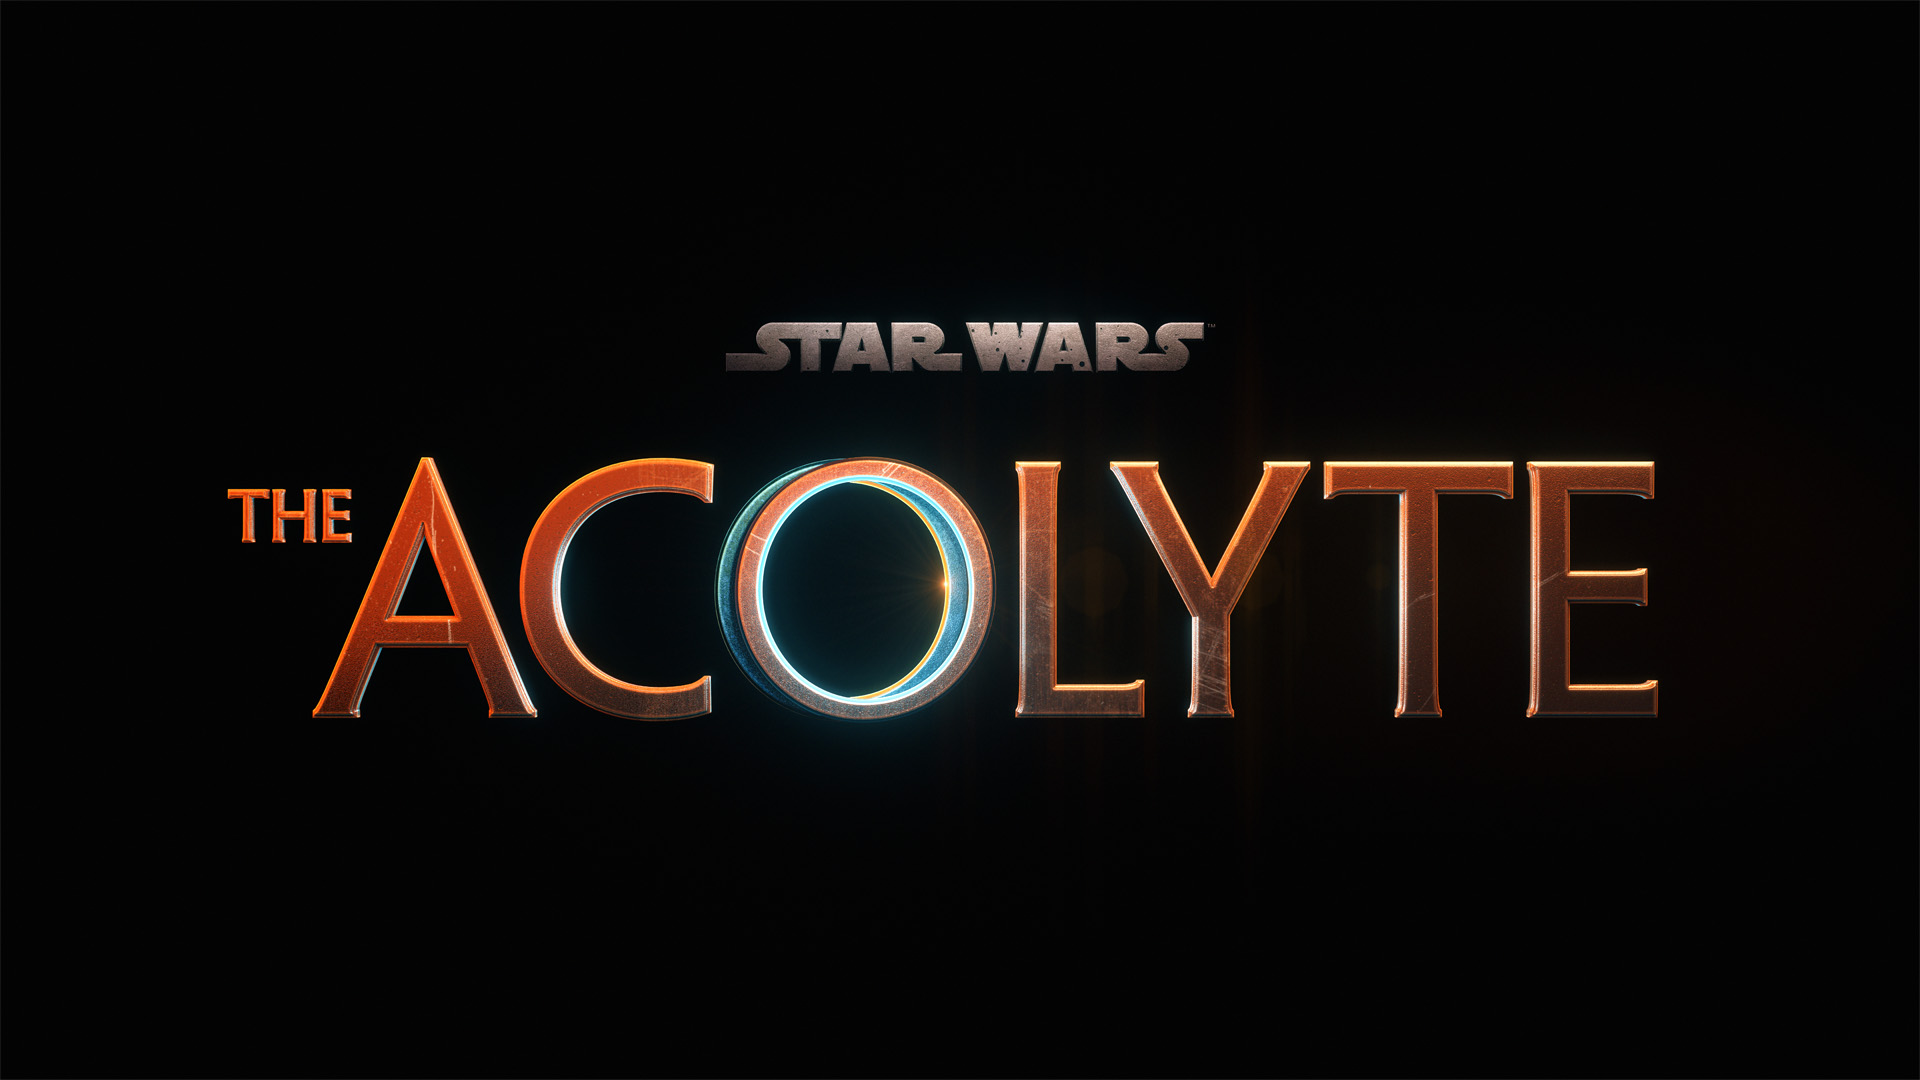 The logo for new Disney Plus Star Wars show The Acolyte.